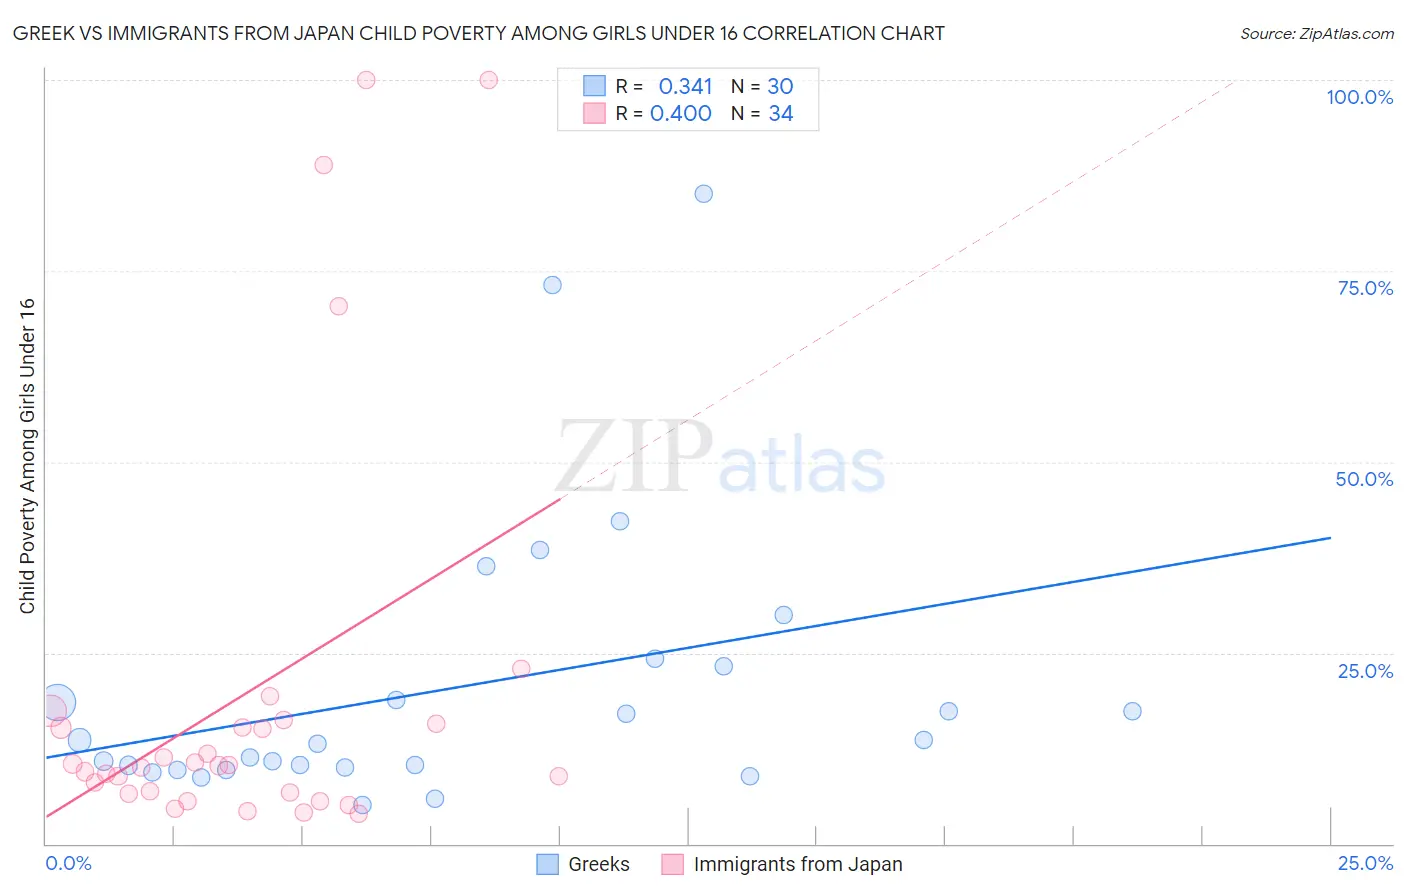 Greek vs Immigrants from Japan Child Poverty Among Girls Under 16